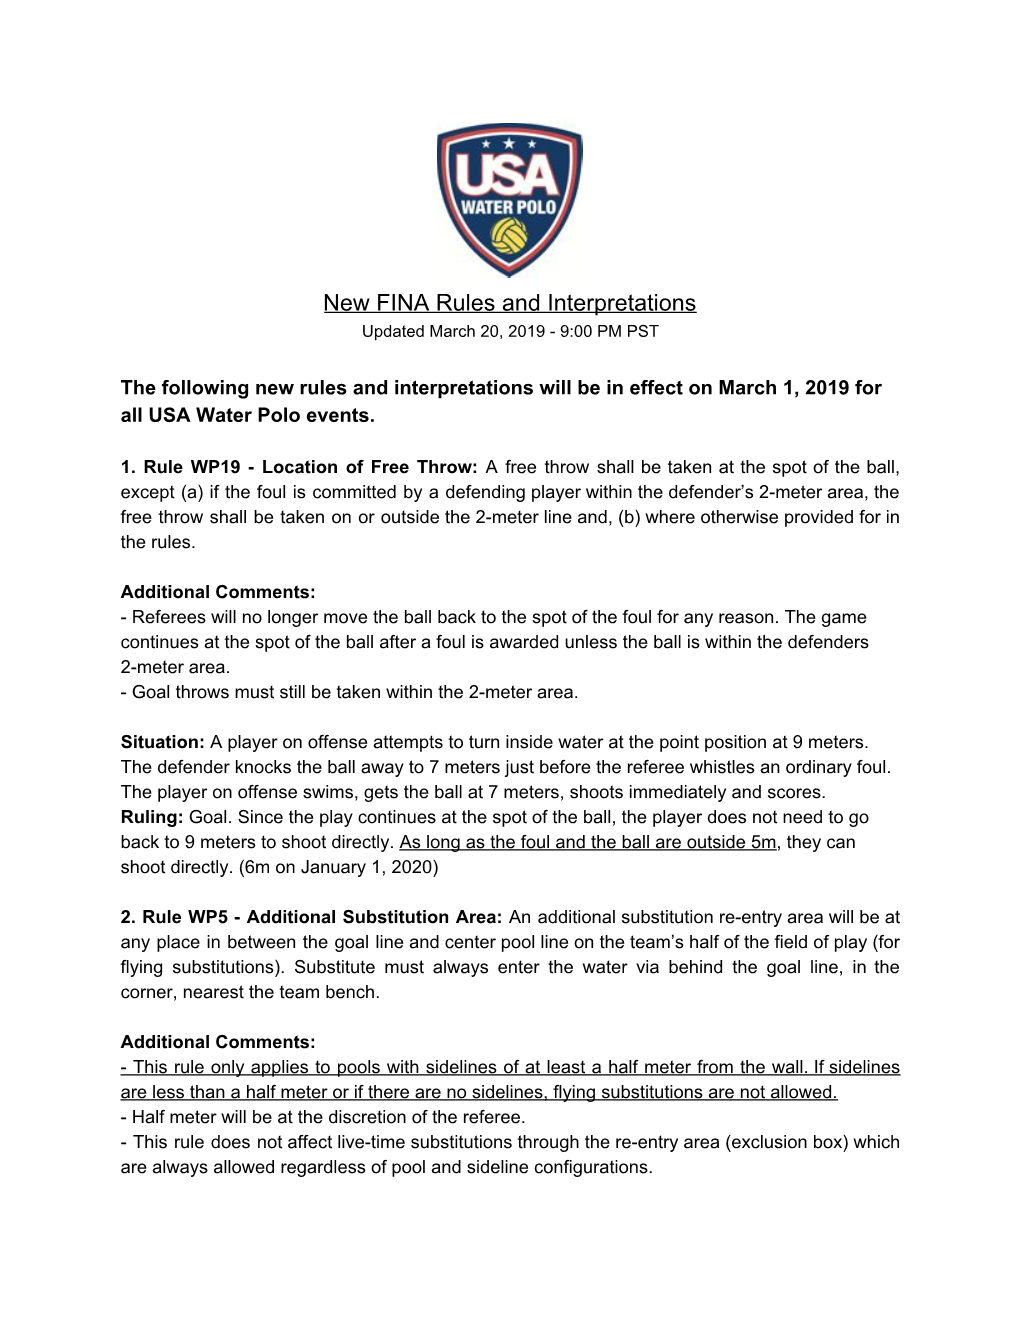 New FINA Rules and Interpretations Updated March 20, 2019 - 9:00 PM PST